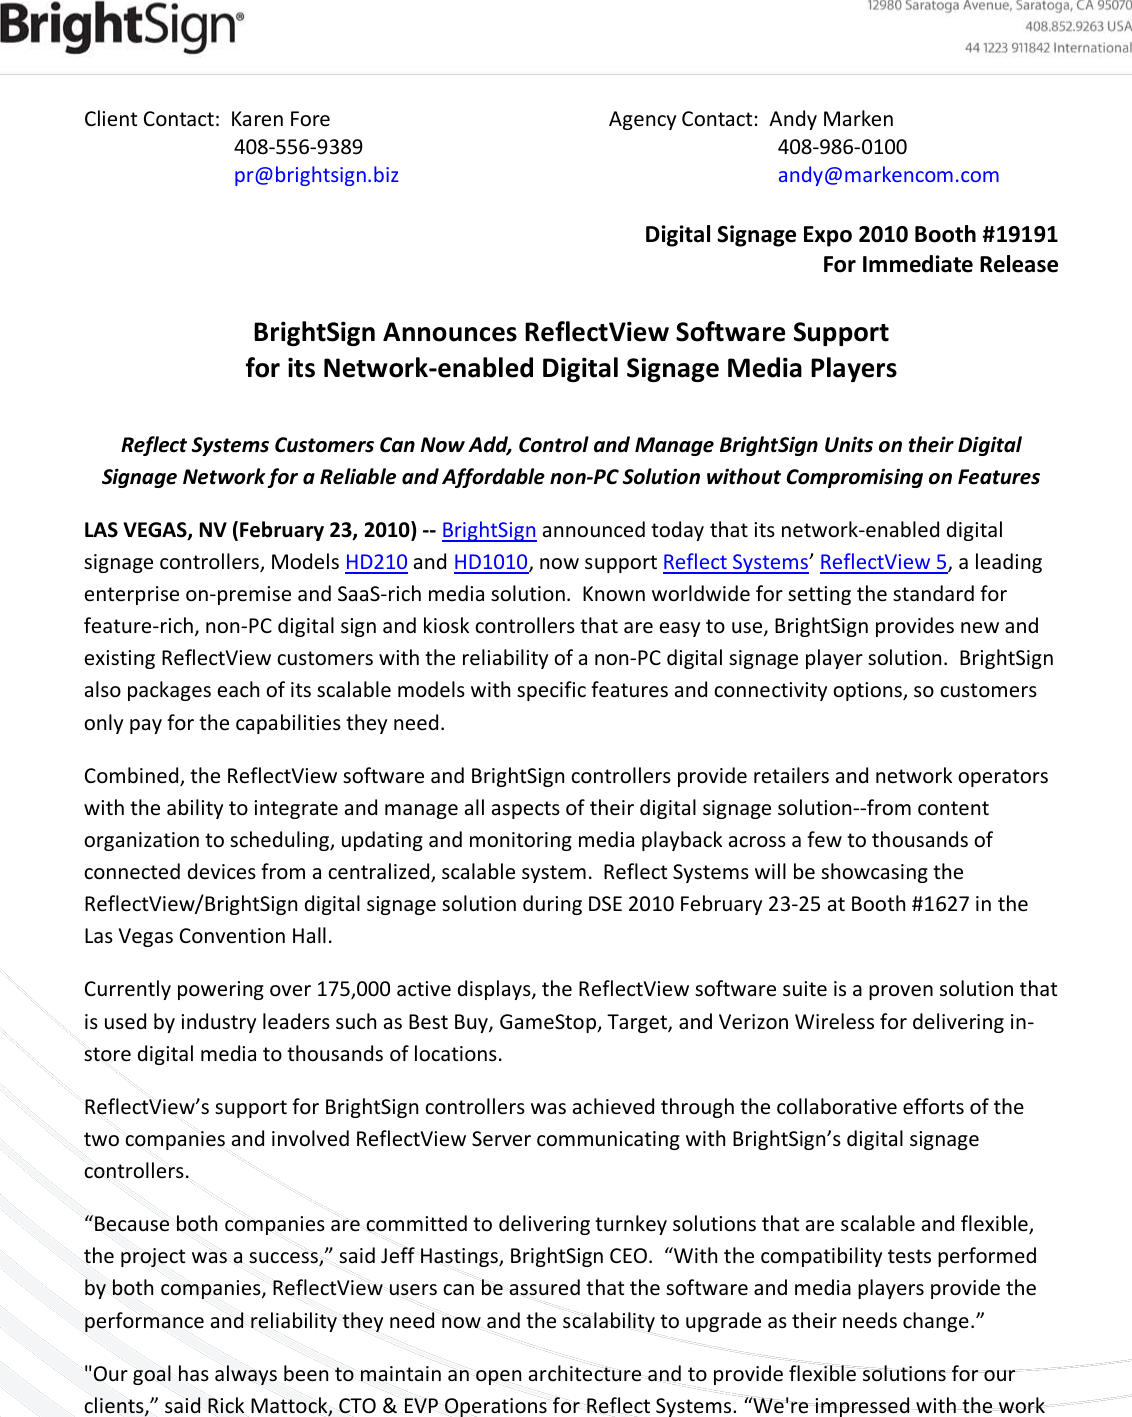 Page 1 of 3 - Client Contact  Bright Sign Announces Reflect View Software Support For Its Network-enabled Digital Signage Media Players